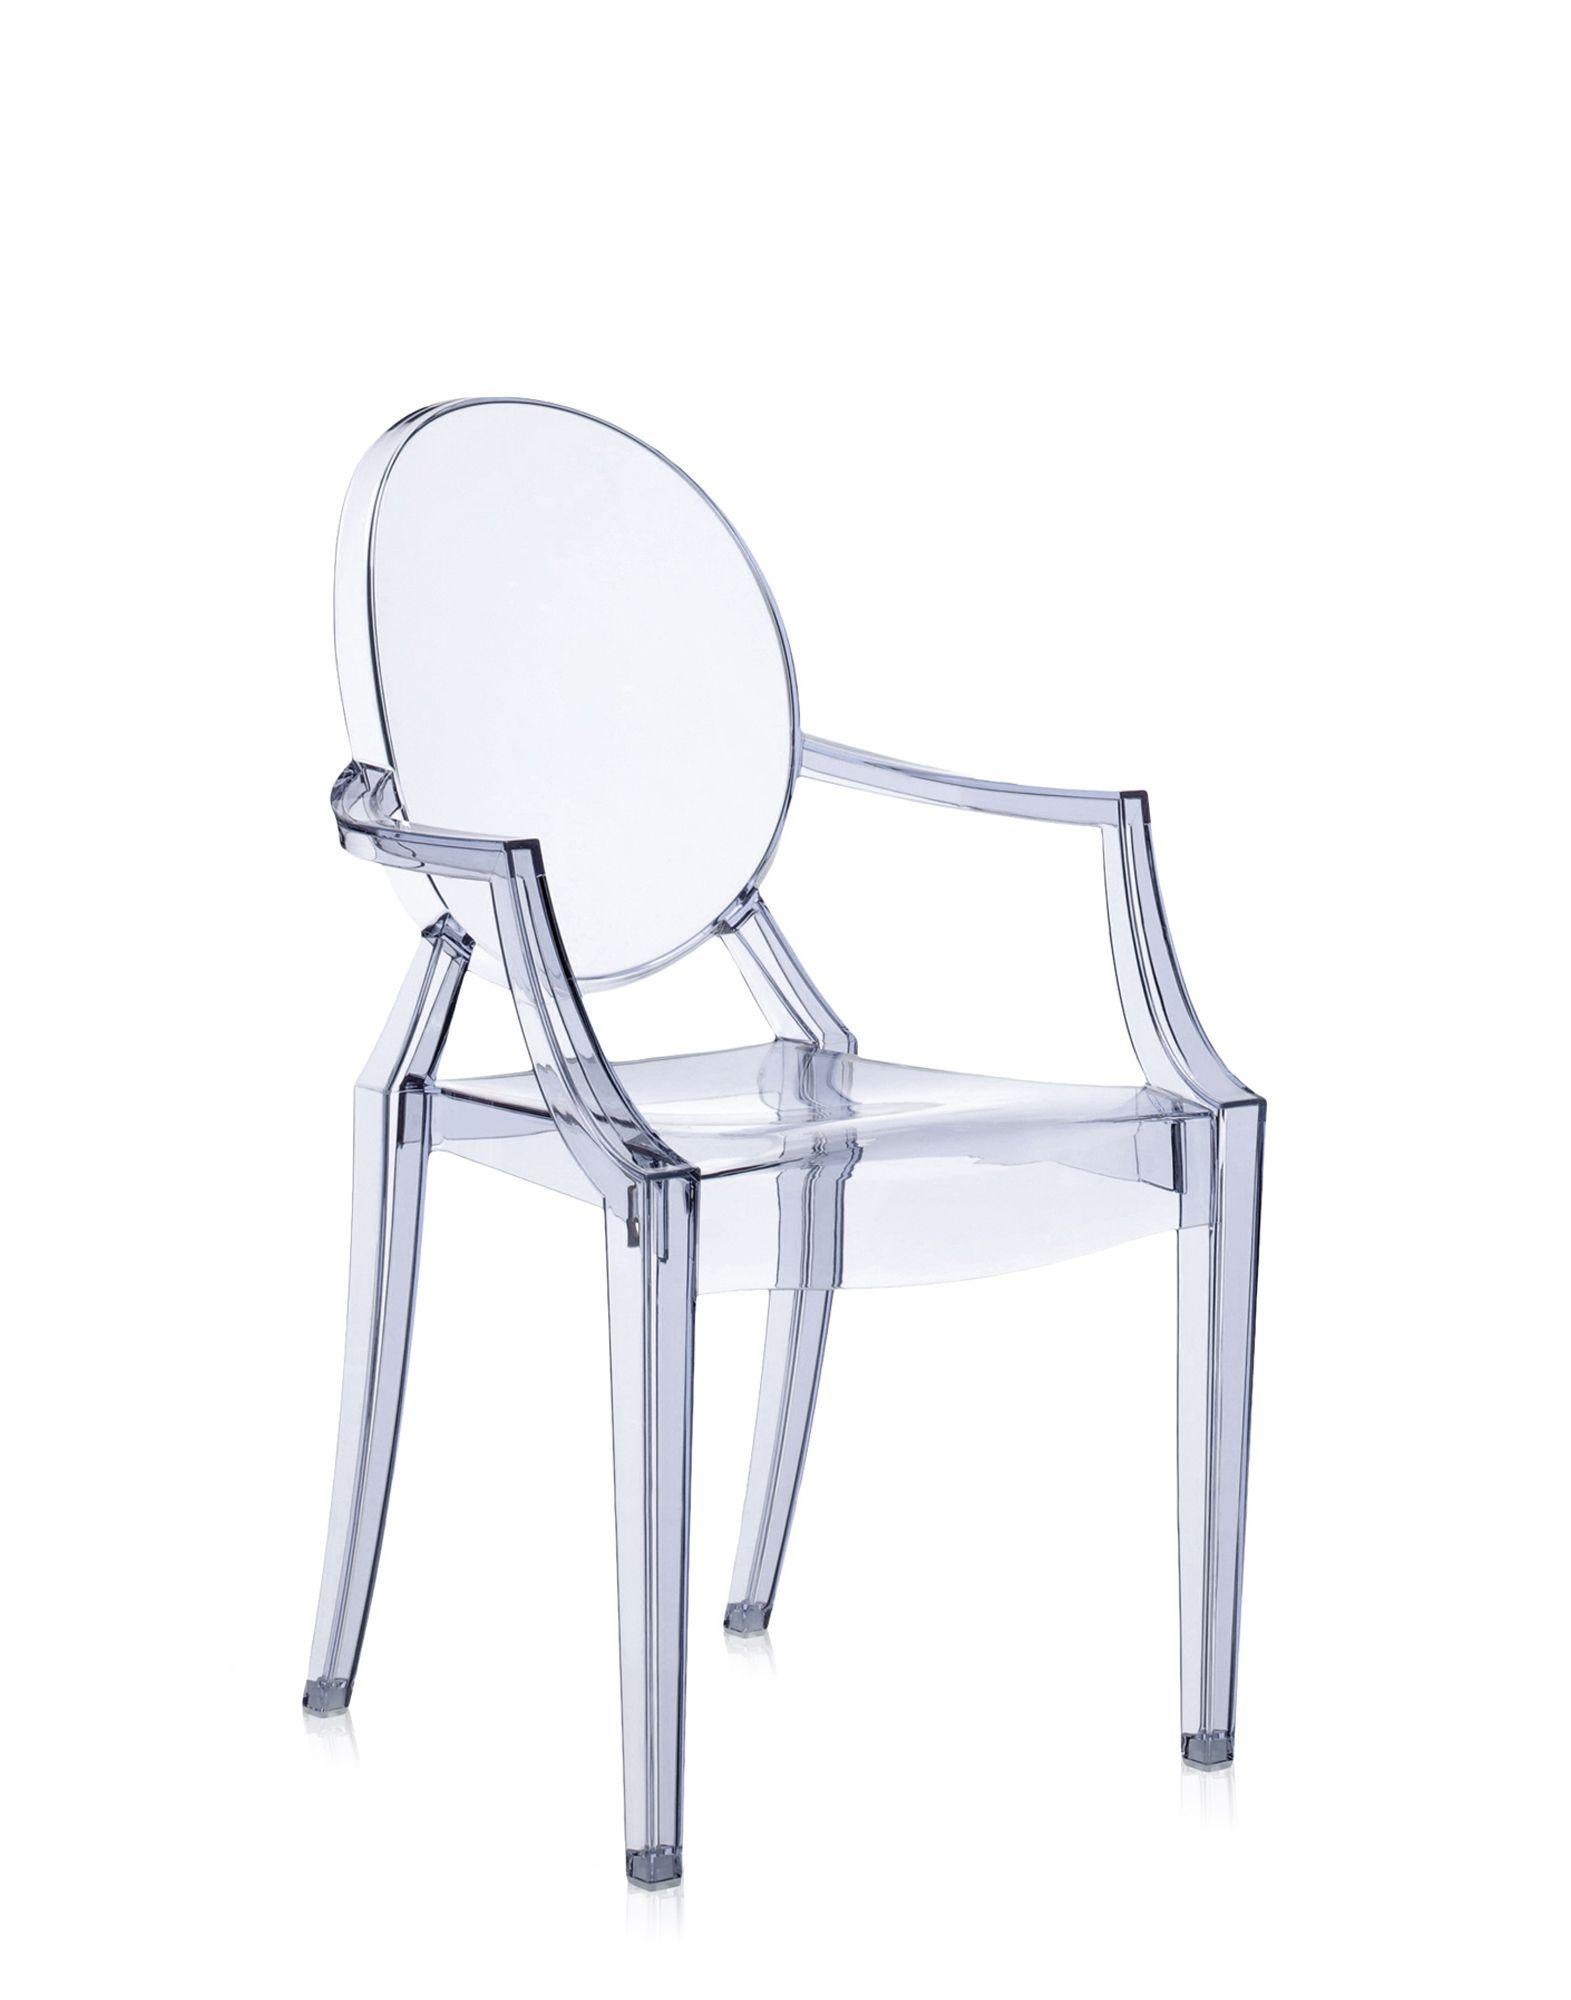 A comfortable armchair in transparent and colored polycarbonate in the Louis XV style, it is the quintessence of baroque revisited to dazzle, excite and captivate. Louis Ghost is the most daring example in the world of injected polycarbonate in a